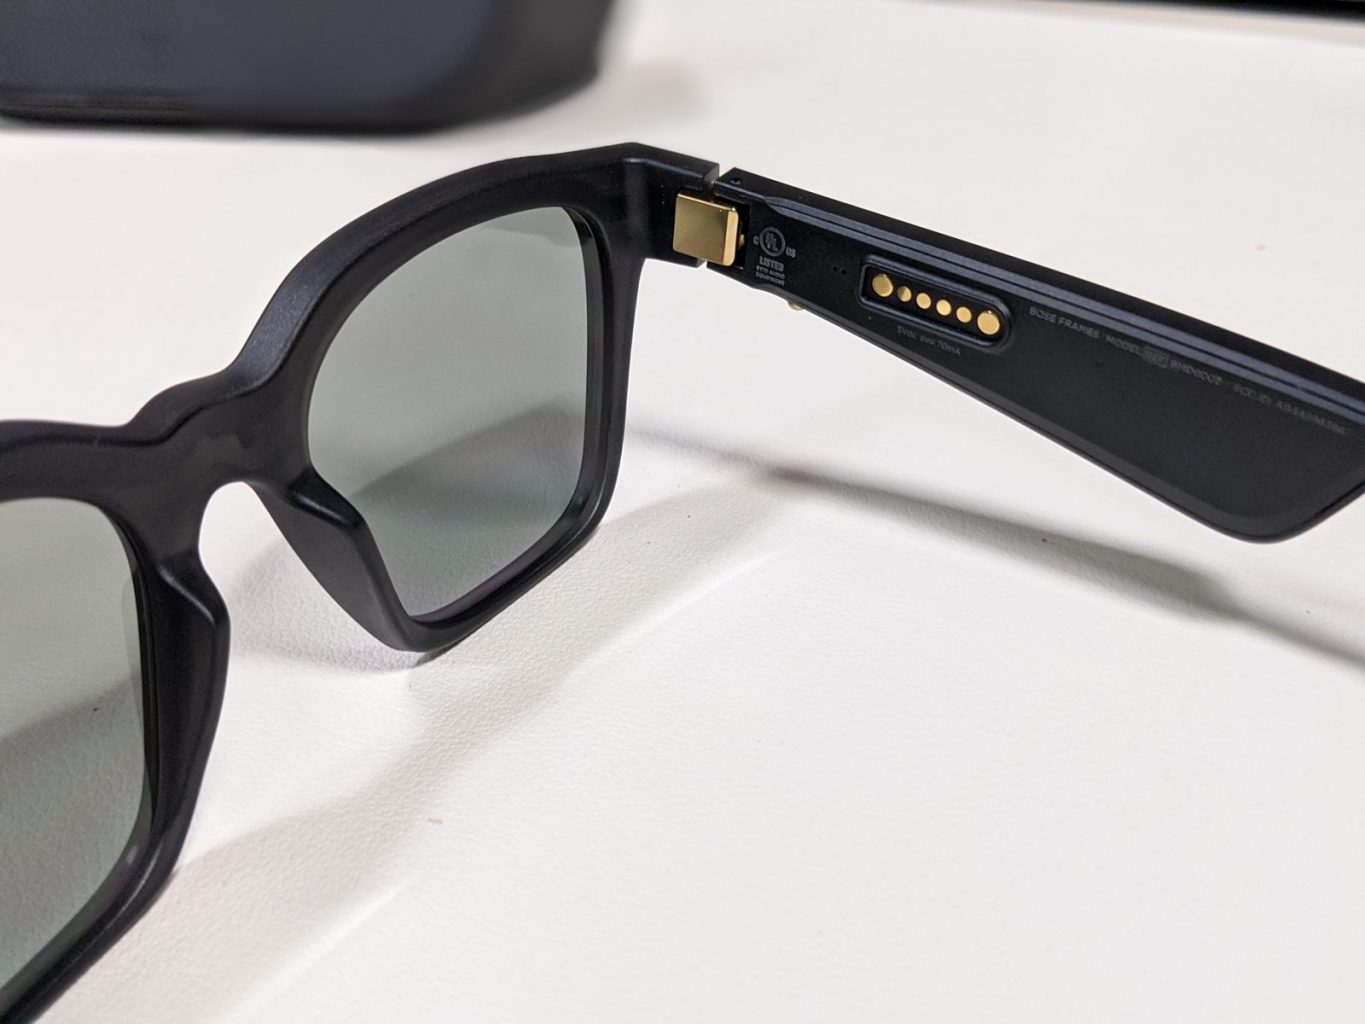 Stylish Bose Frames Available at Best Buy -